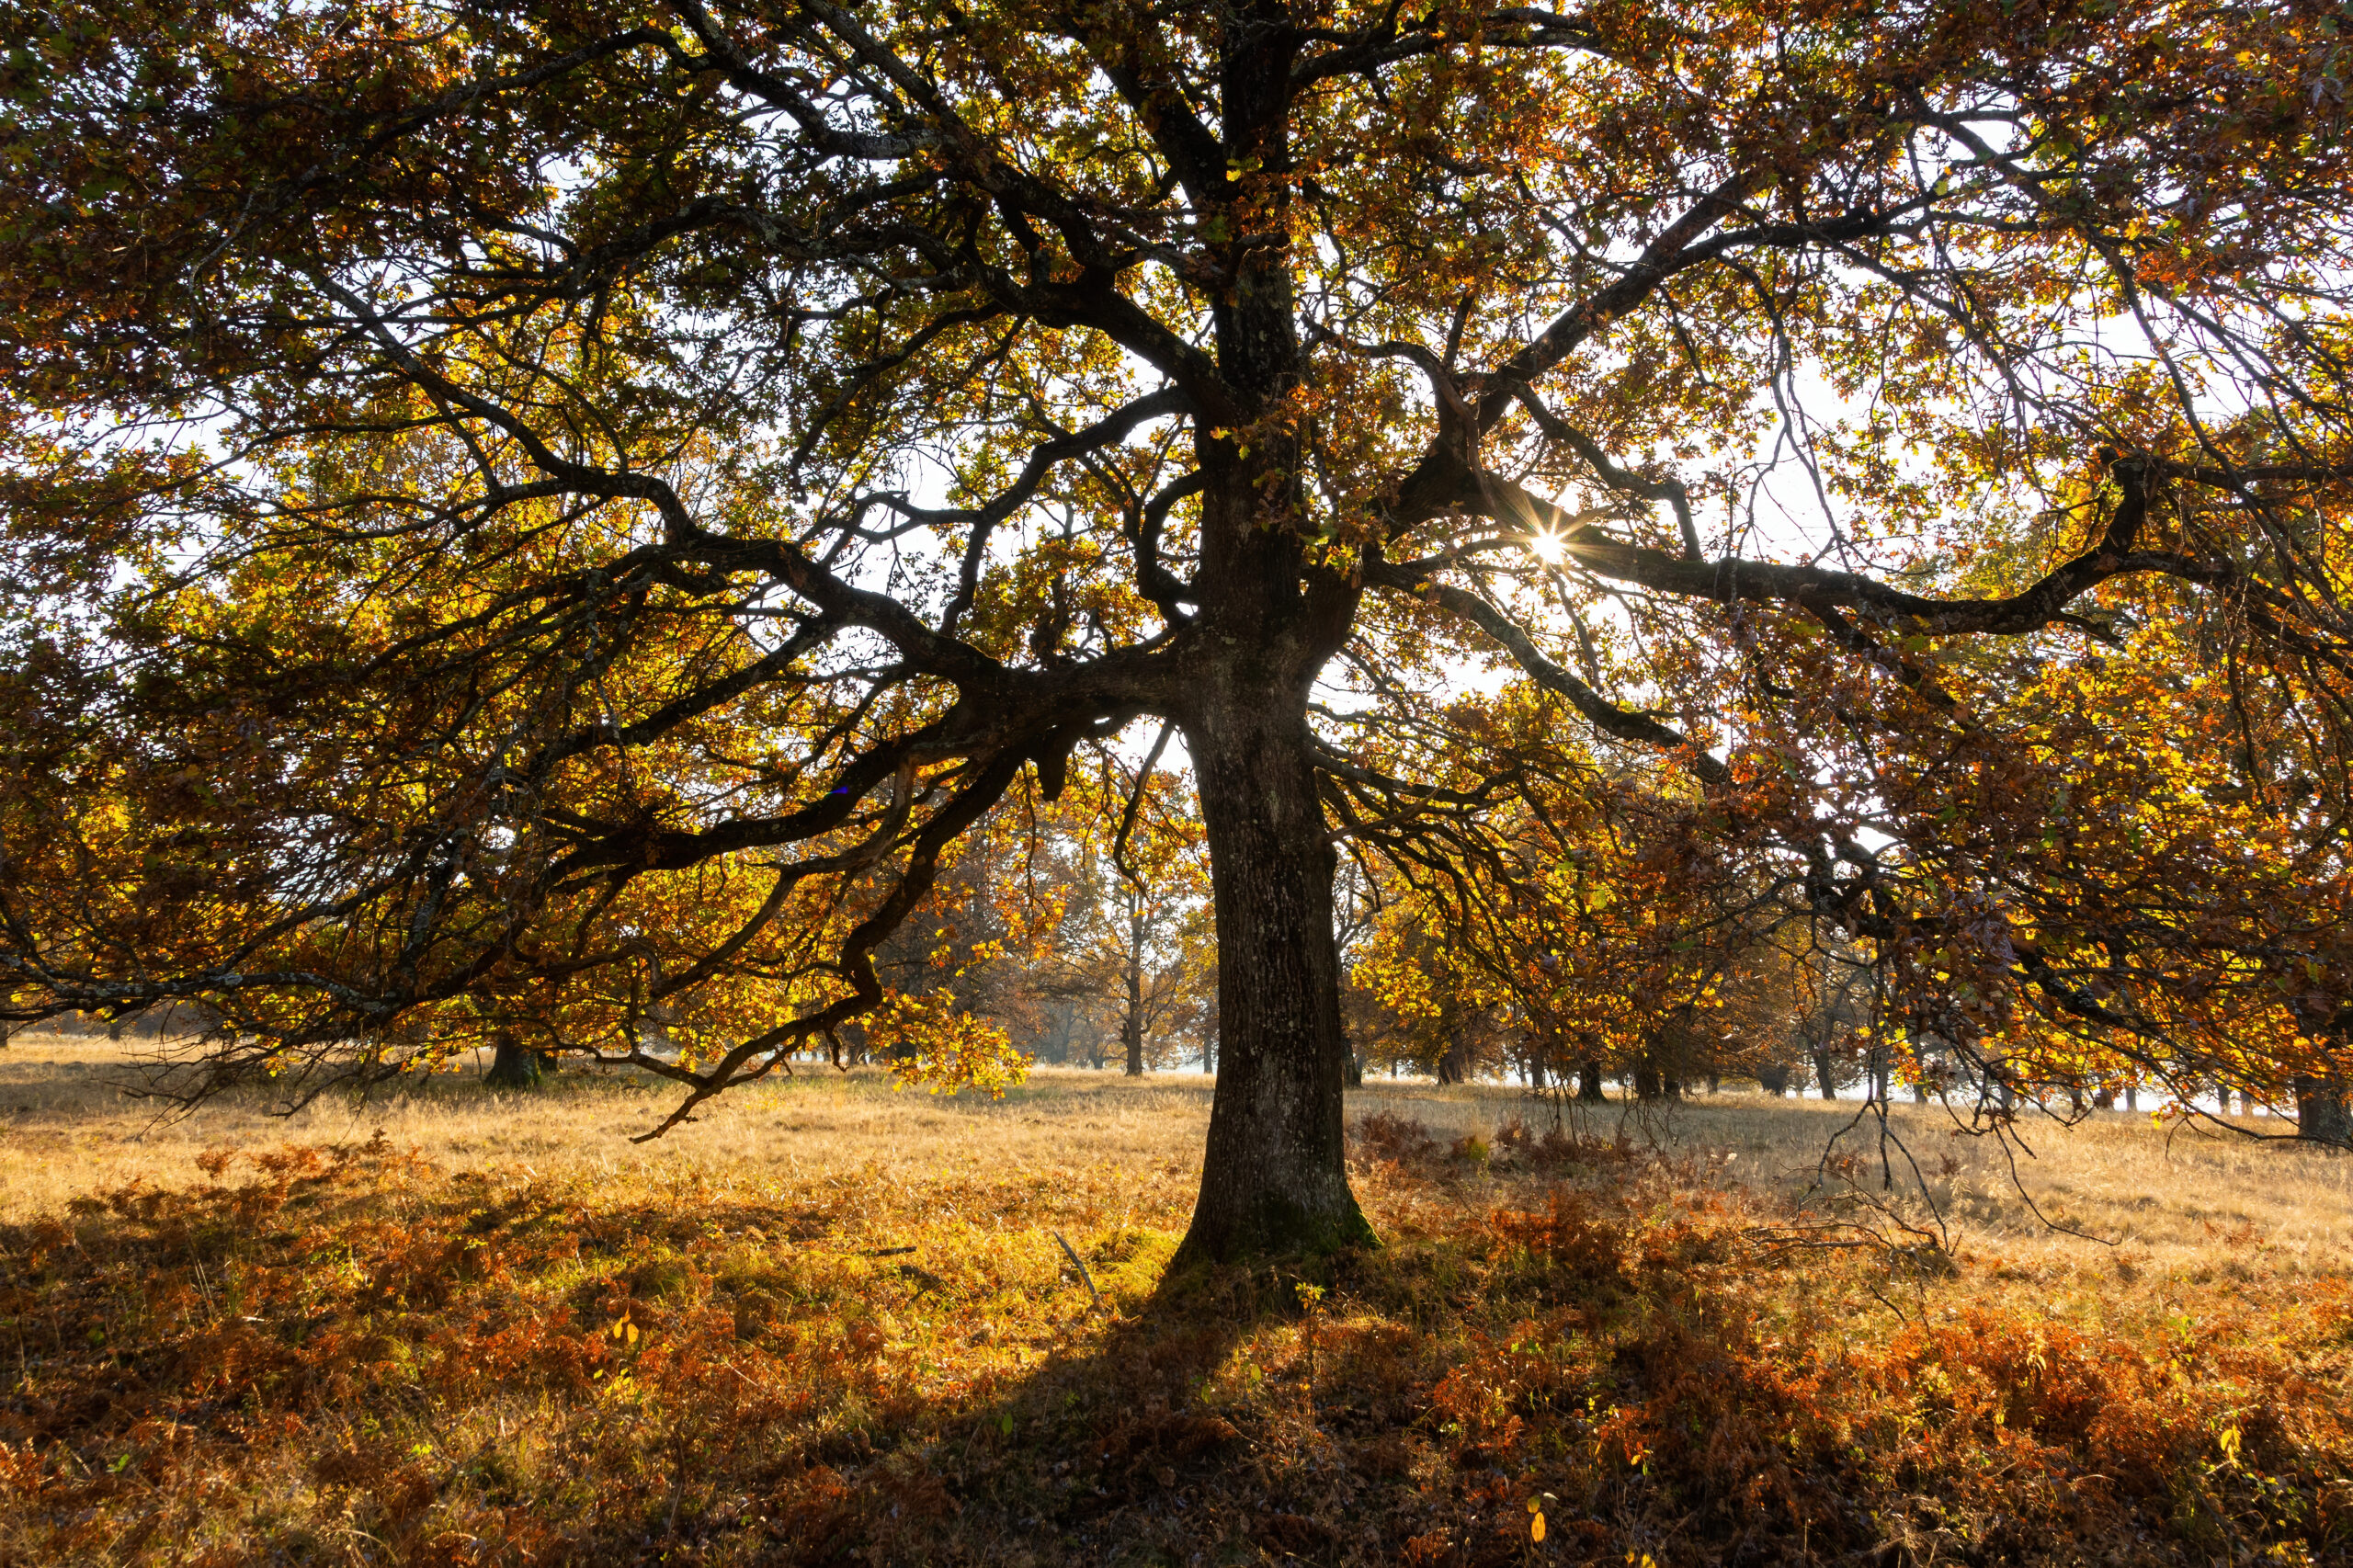 Majestic european oak, quercus robur, with large branches growing on a meadow in autumn. Sun shining through orange leaves of a massive tree in wilderness.